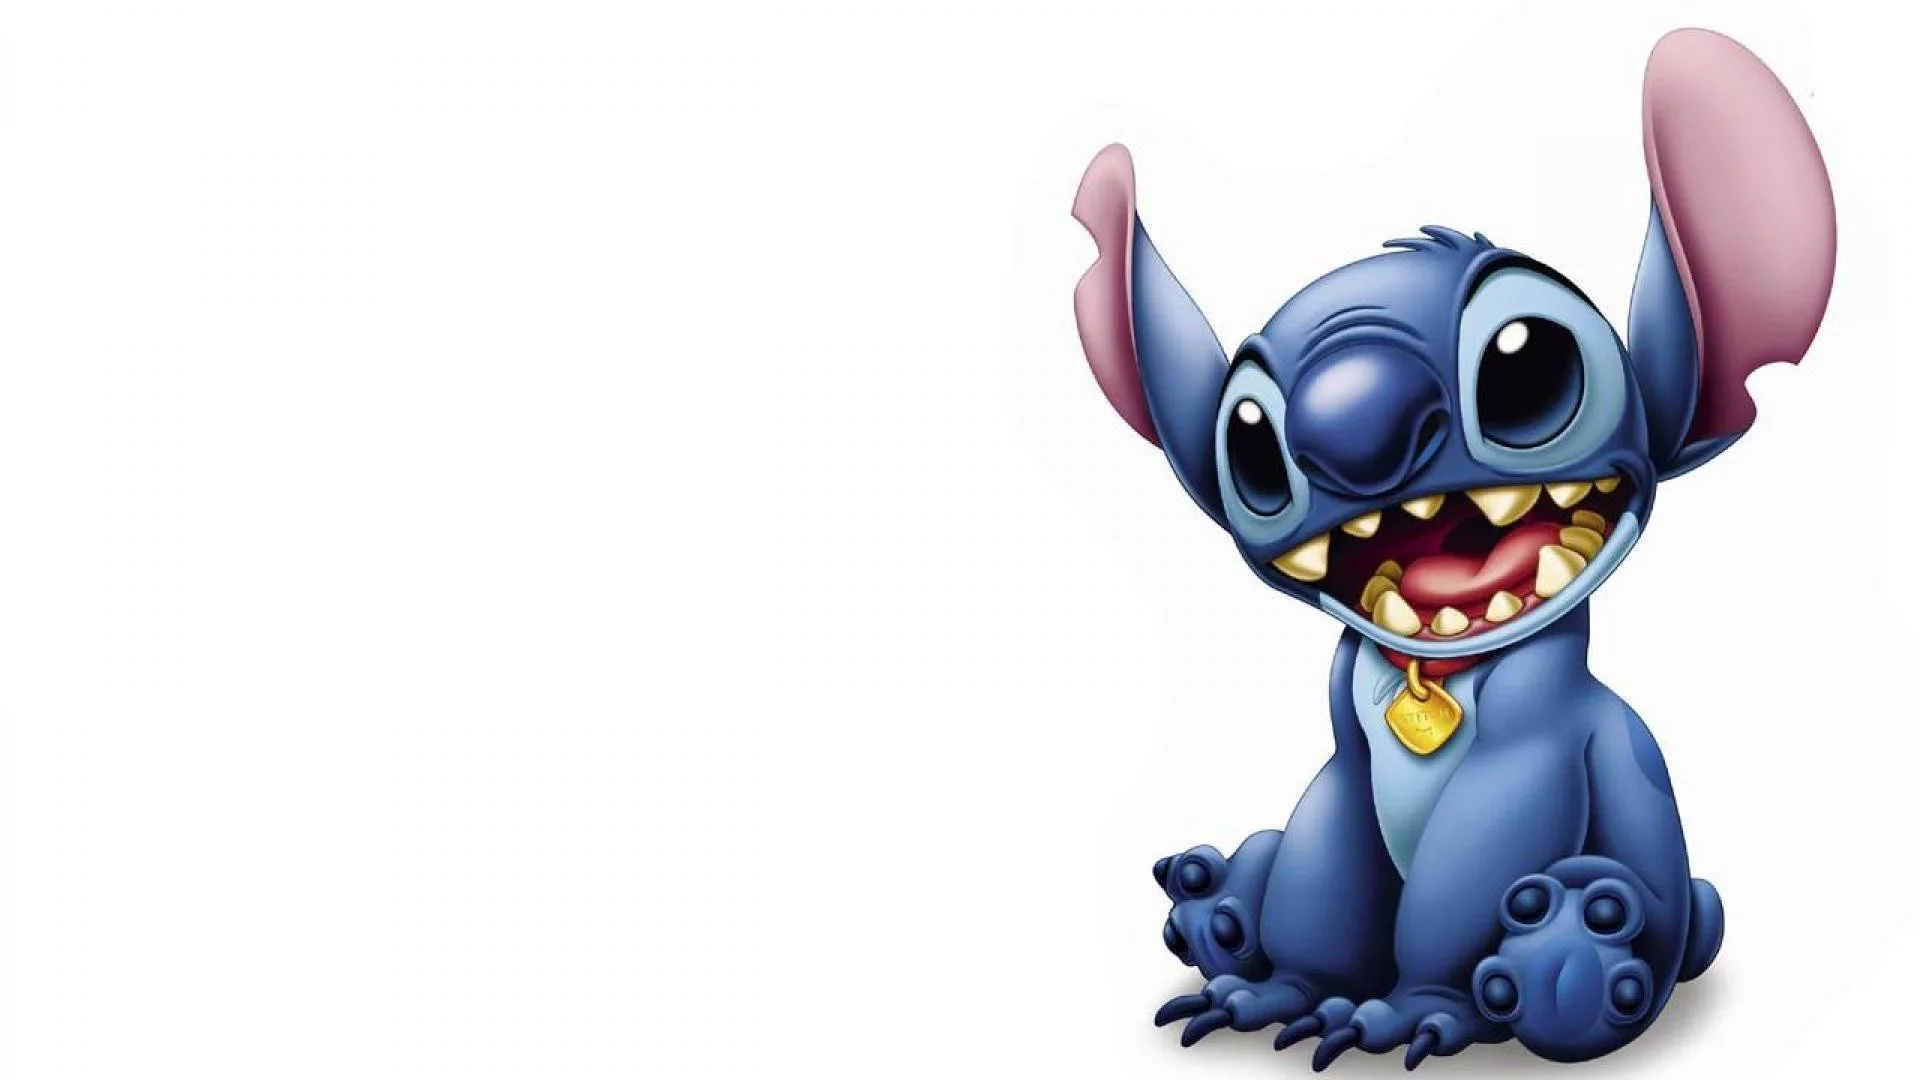 cute pictures of stitch wallpaper